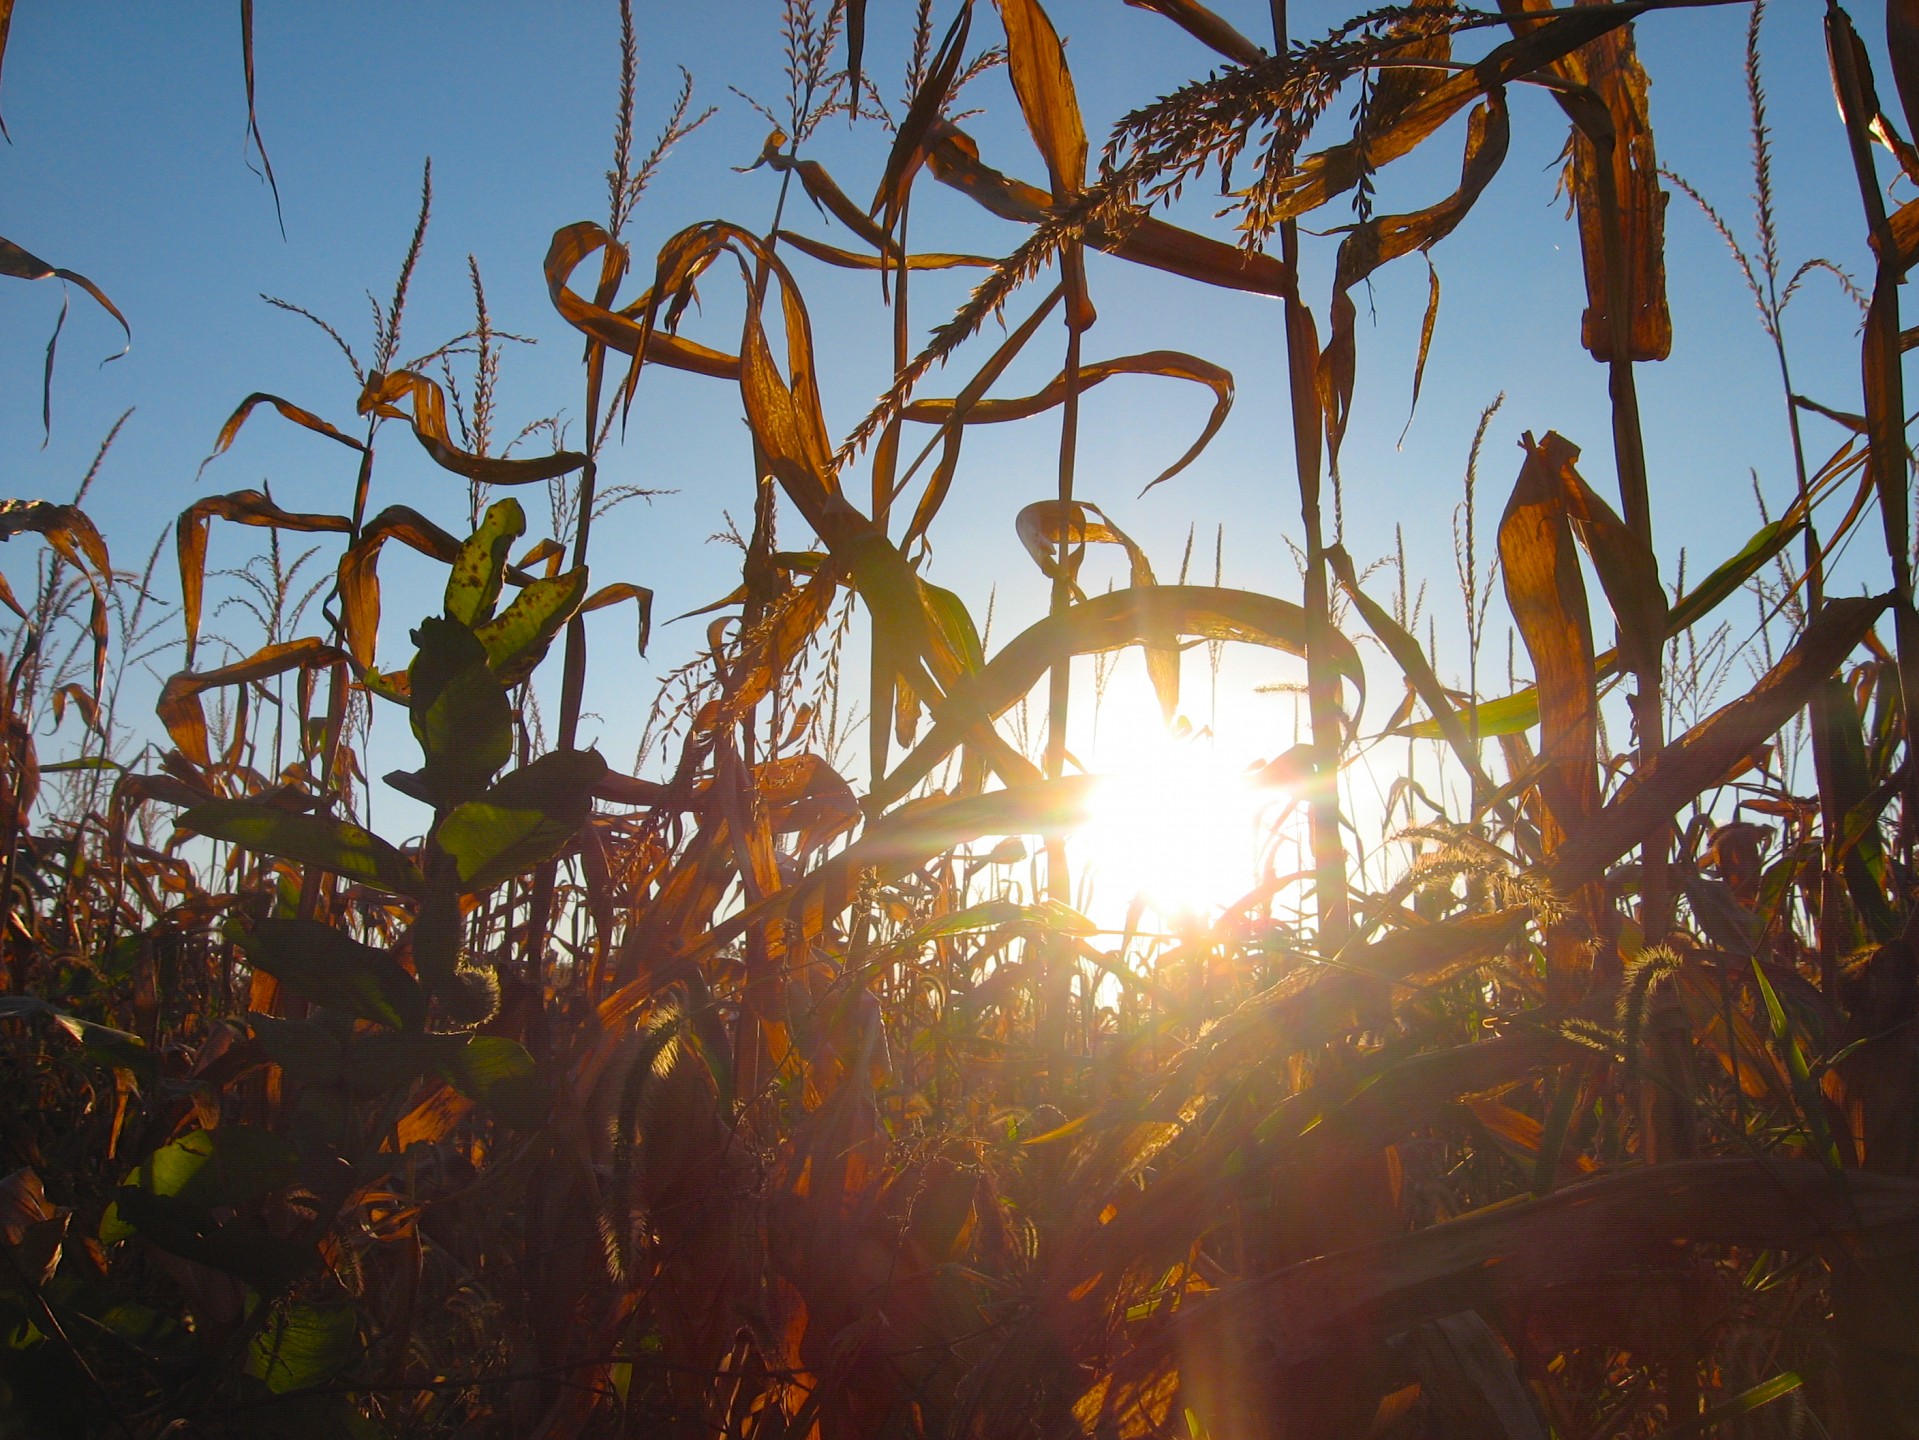 Sun light filters through young stalks of corn on an early summer evening.